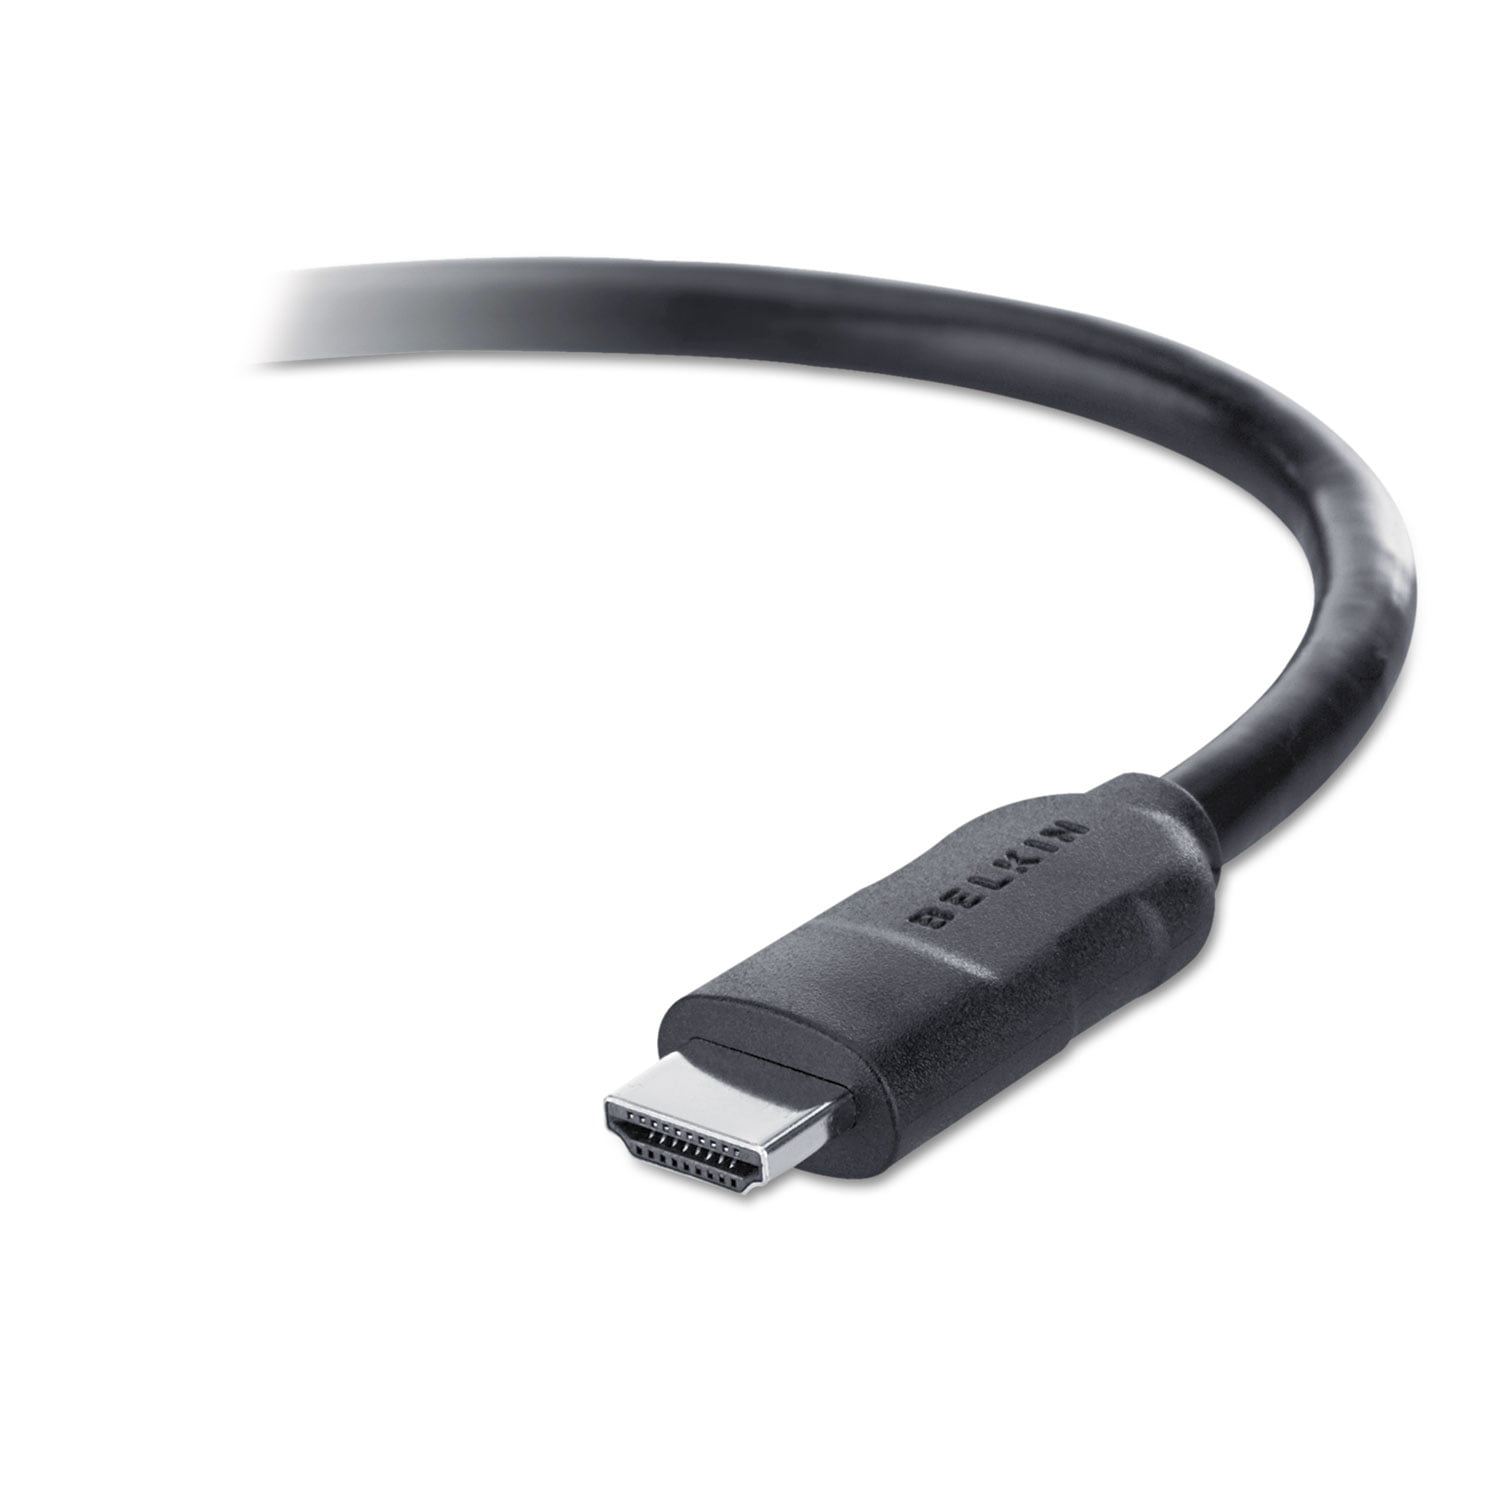 Belkin HDMI to HDMI Audio/Video Cable, 25 ft., Black 